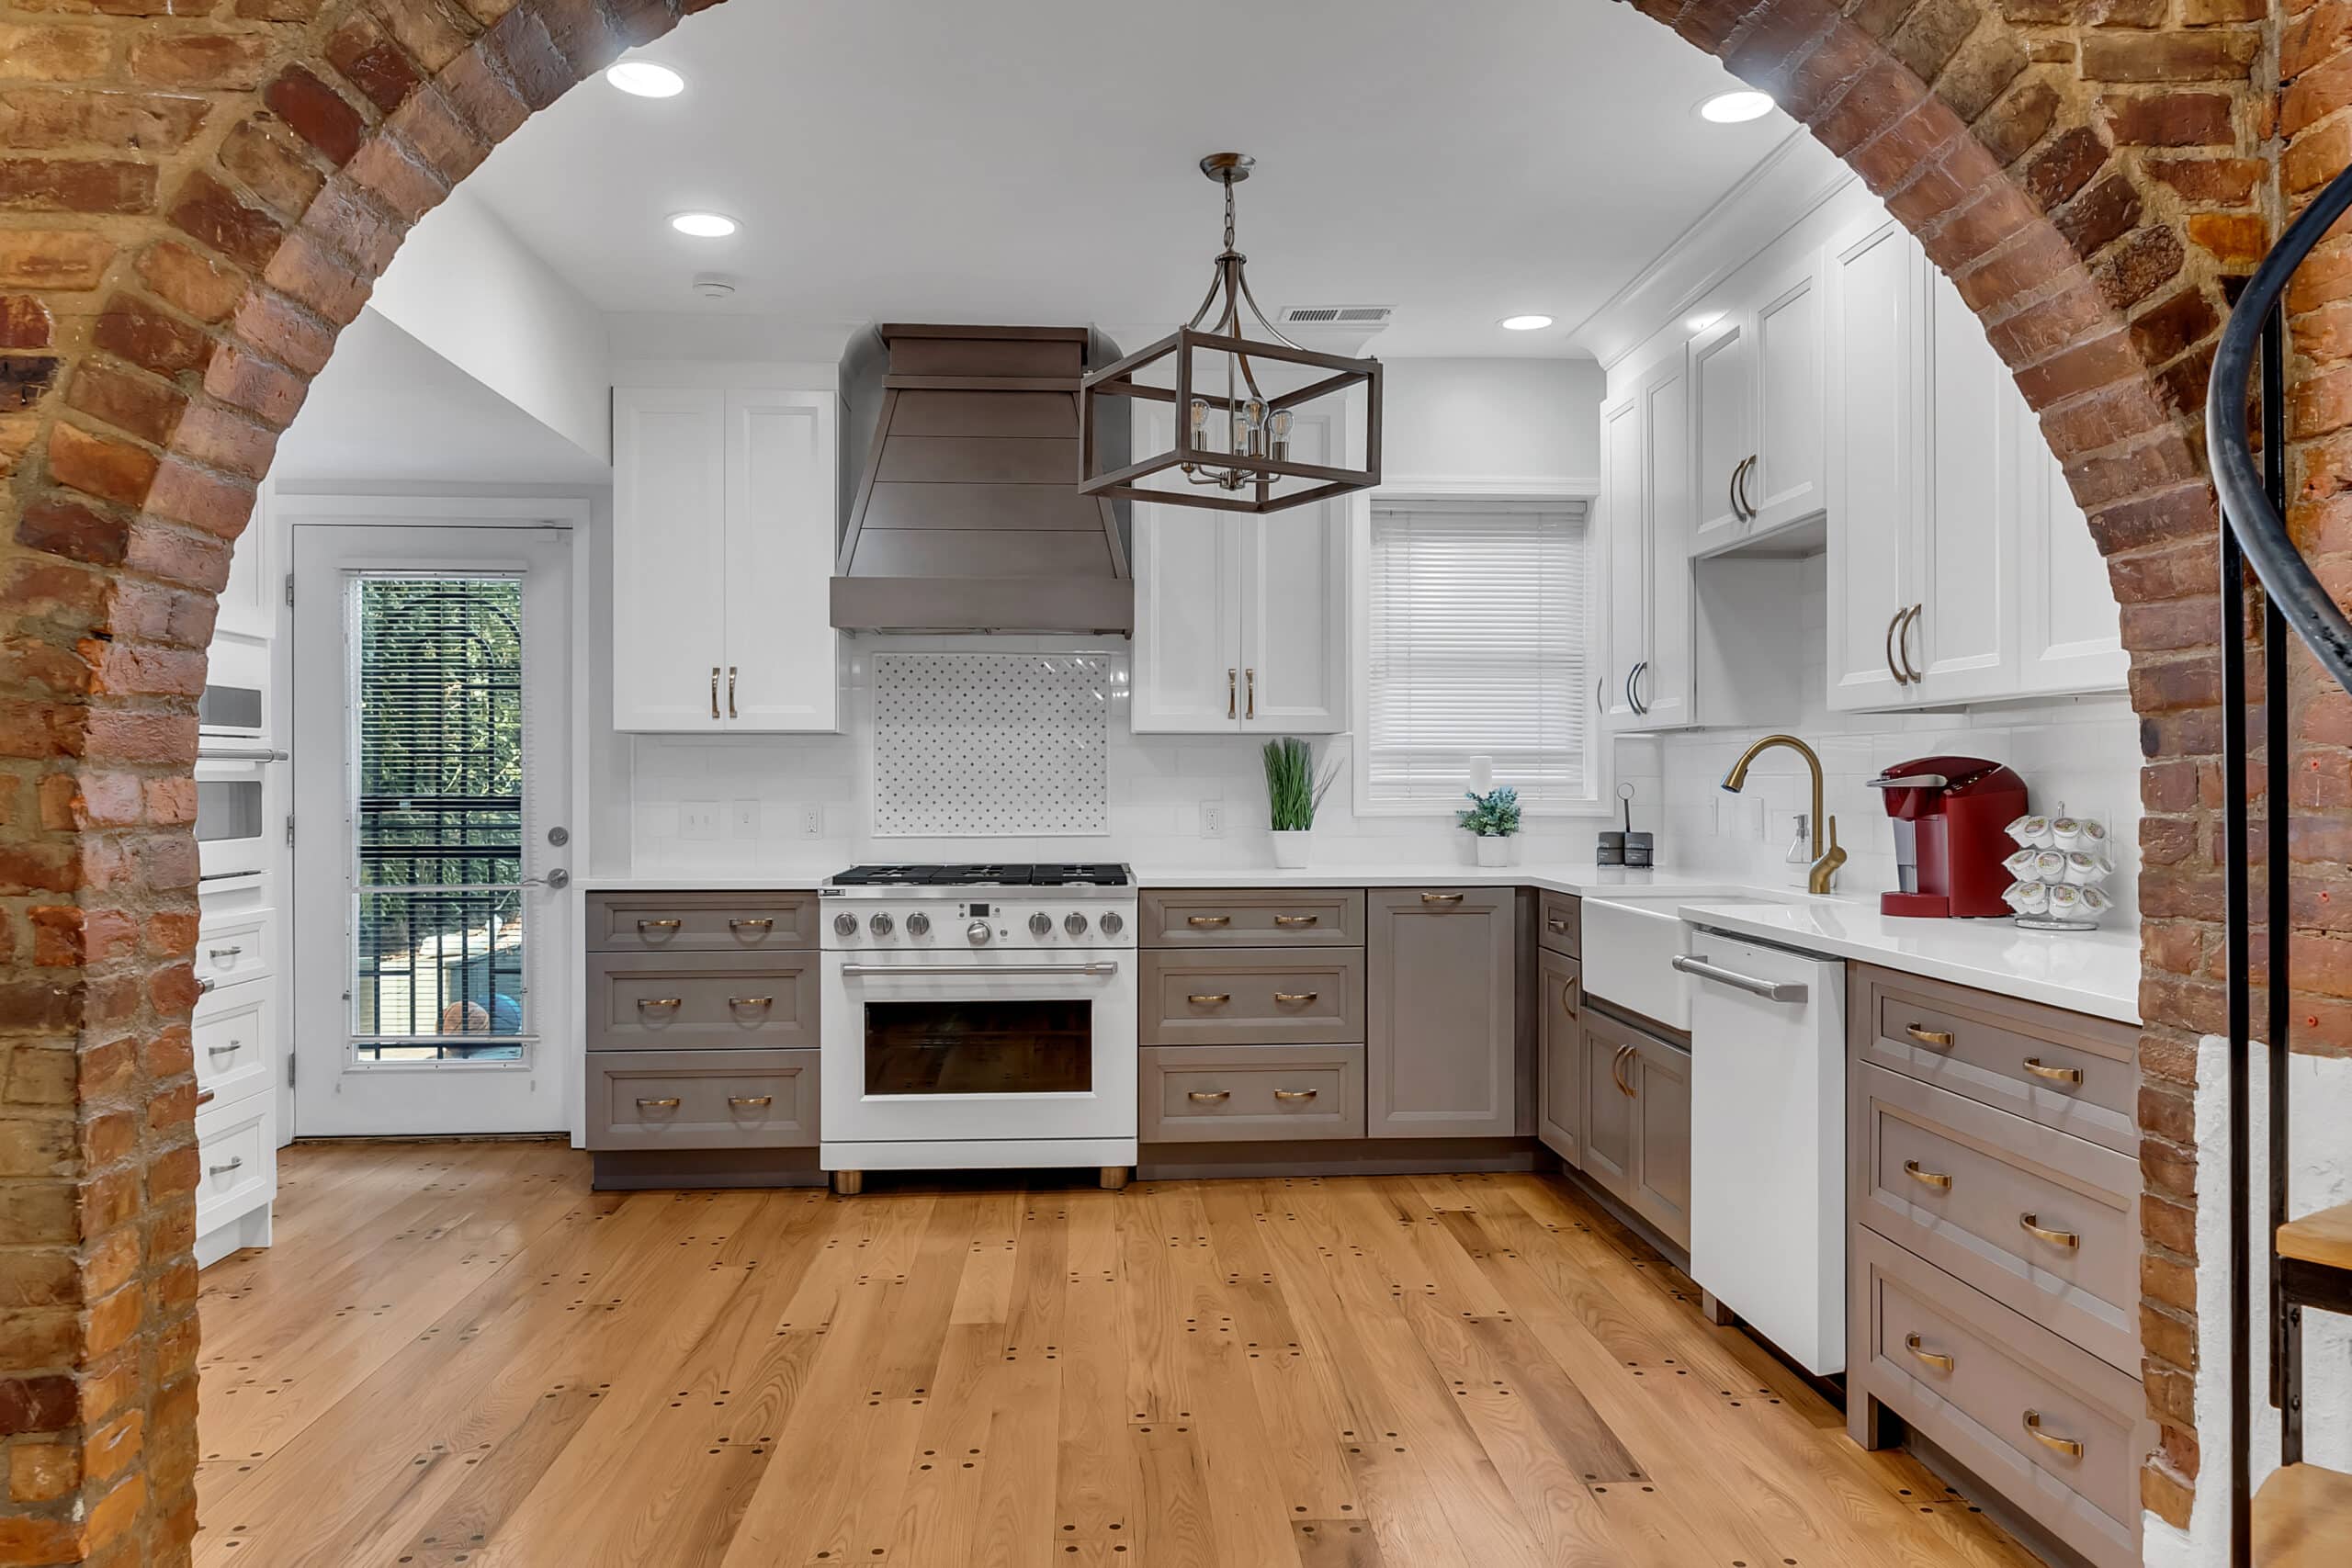 Spacious kitchen with white and grey cabinets, wood flooring, and white countertop